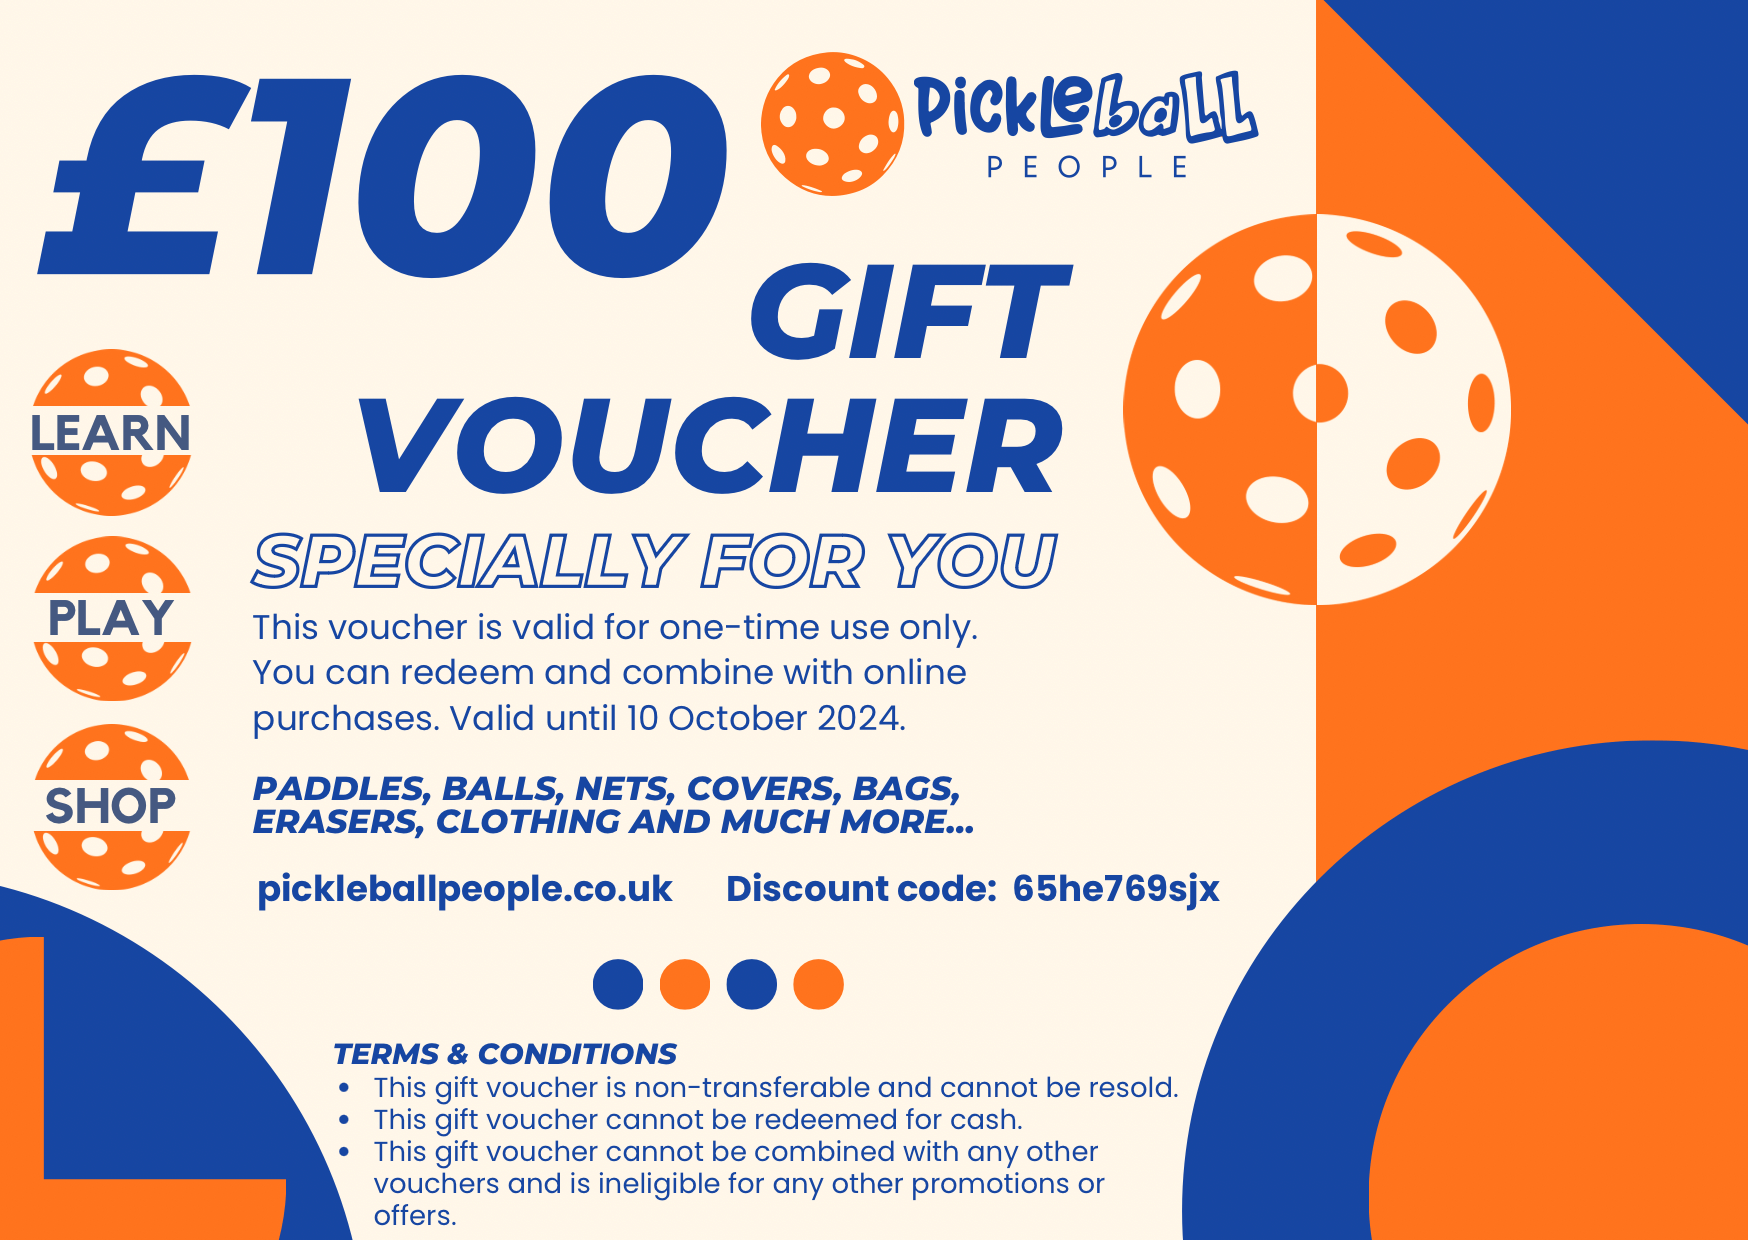 Featured image for “Pickleball People £100 - Gift Voucher”